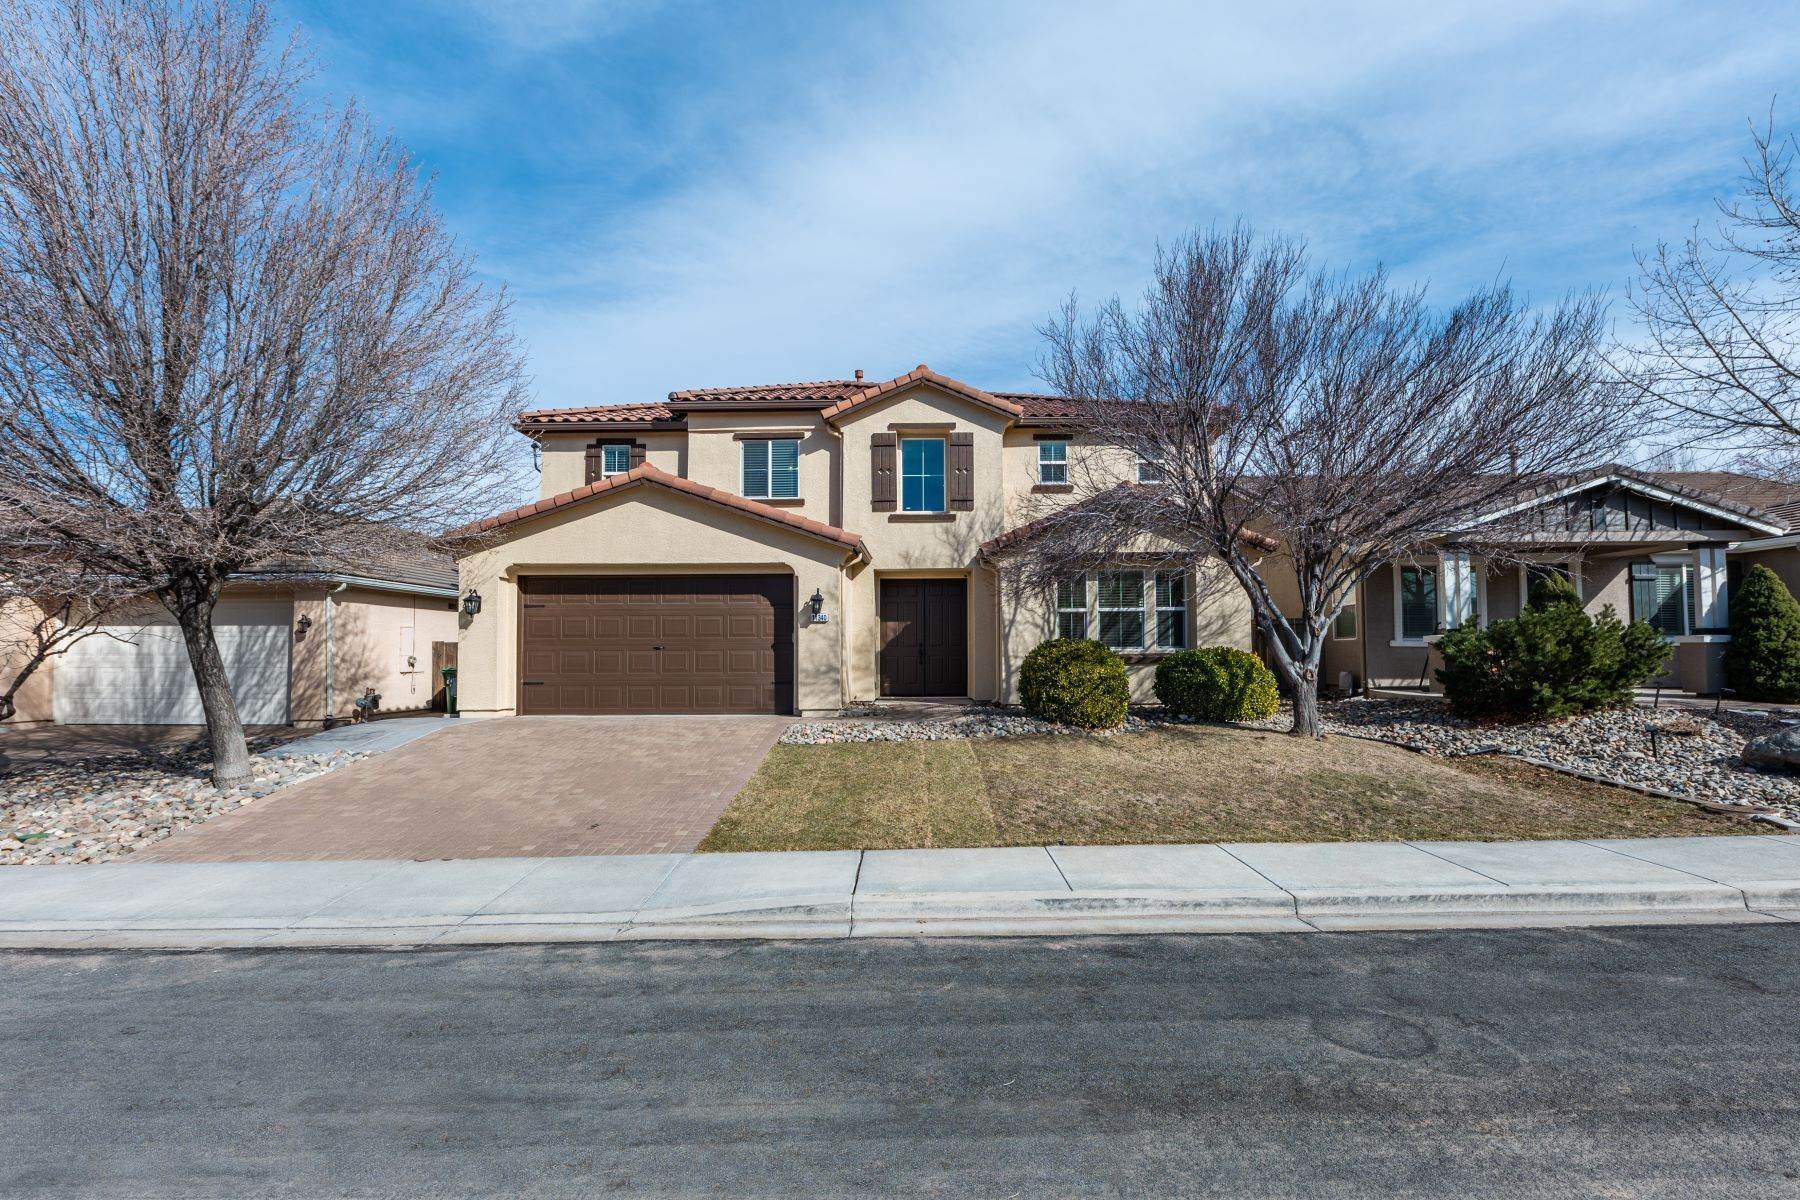 27. Single Family Homes for Active at Beautifully updated 11340 Parma Court Reno, Nevada 89521 United States